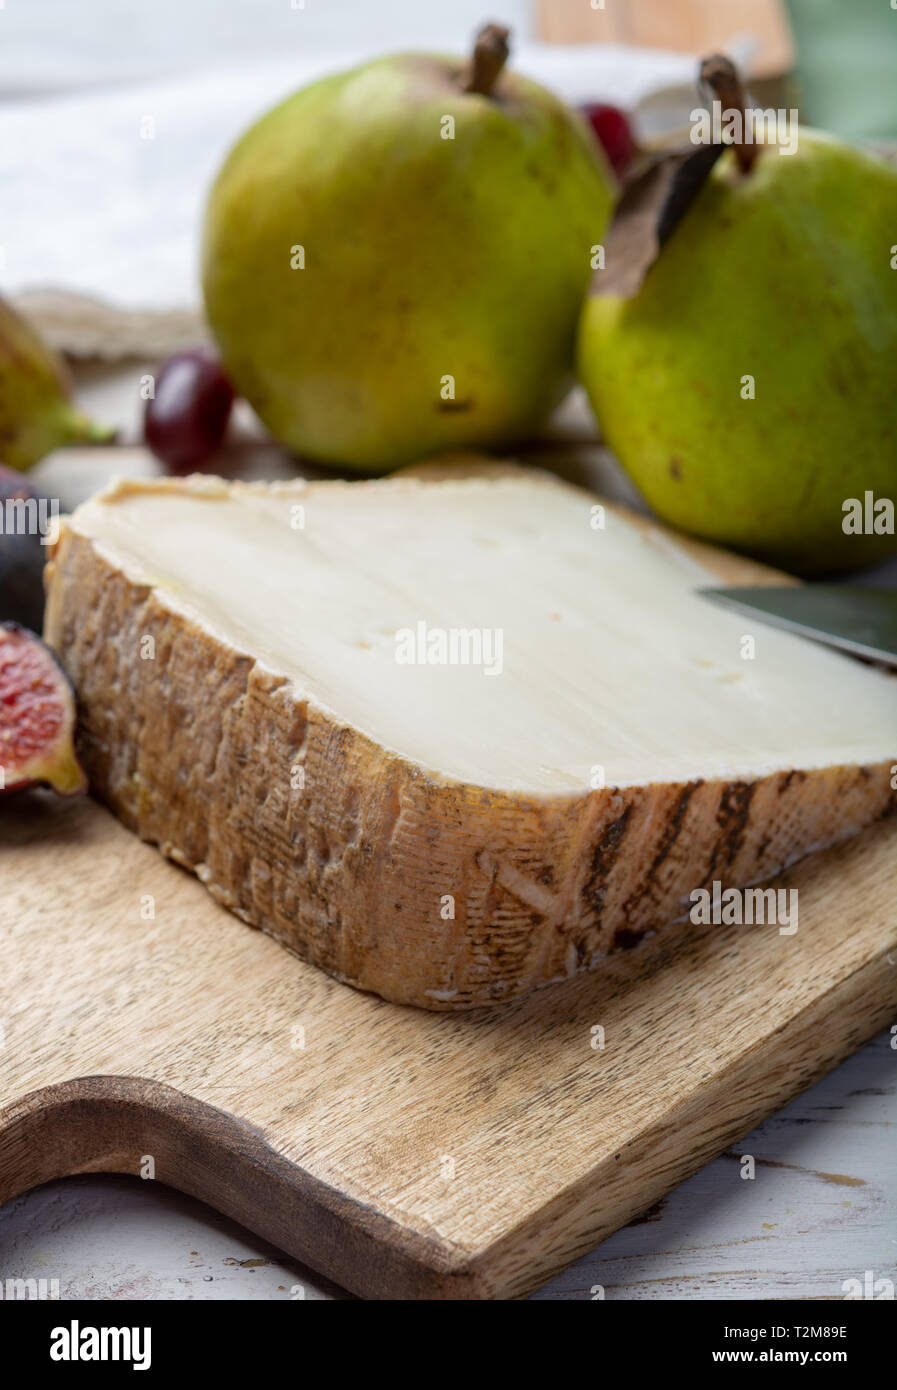 Piece of French cheese Tomme de Brebis made from sheep milk served as dessert with fresh figs and pears close up Stock Photo